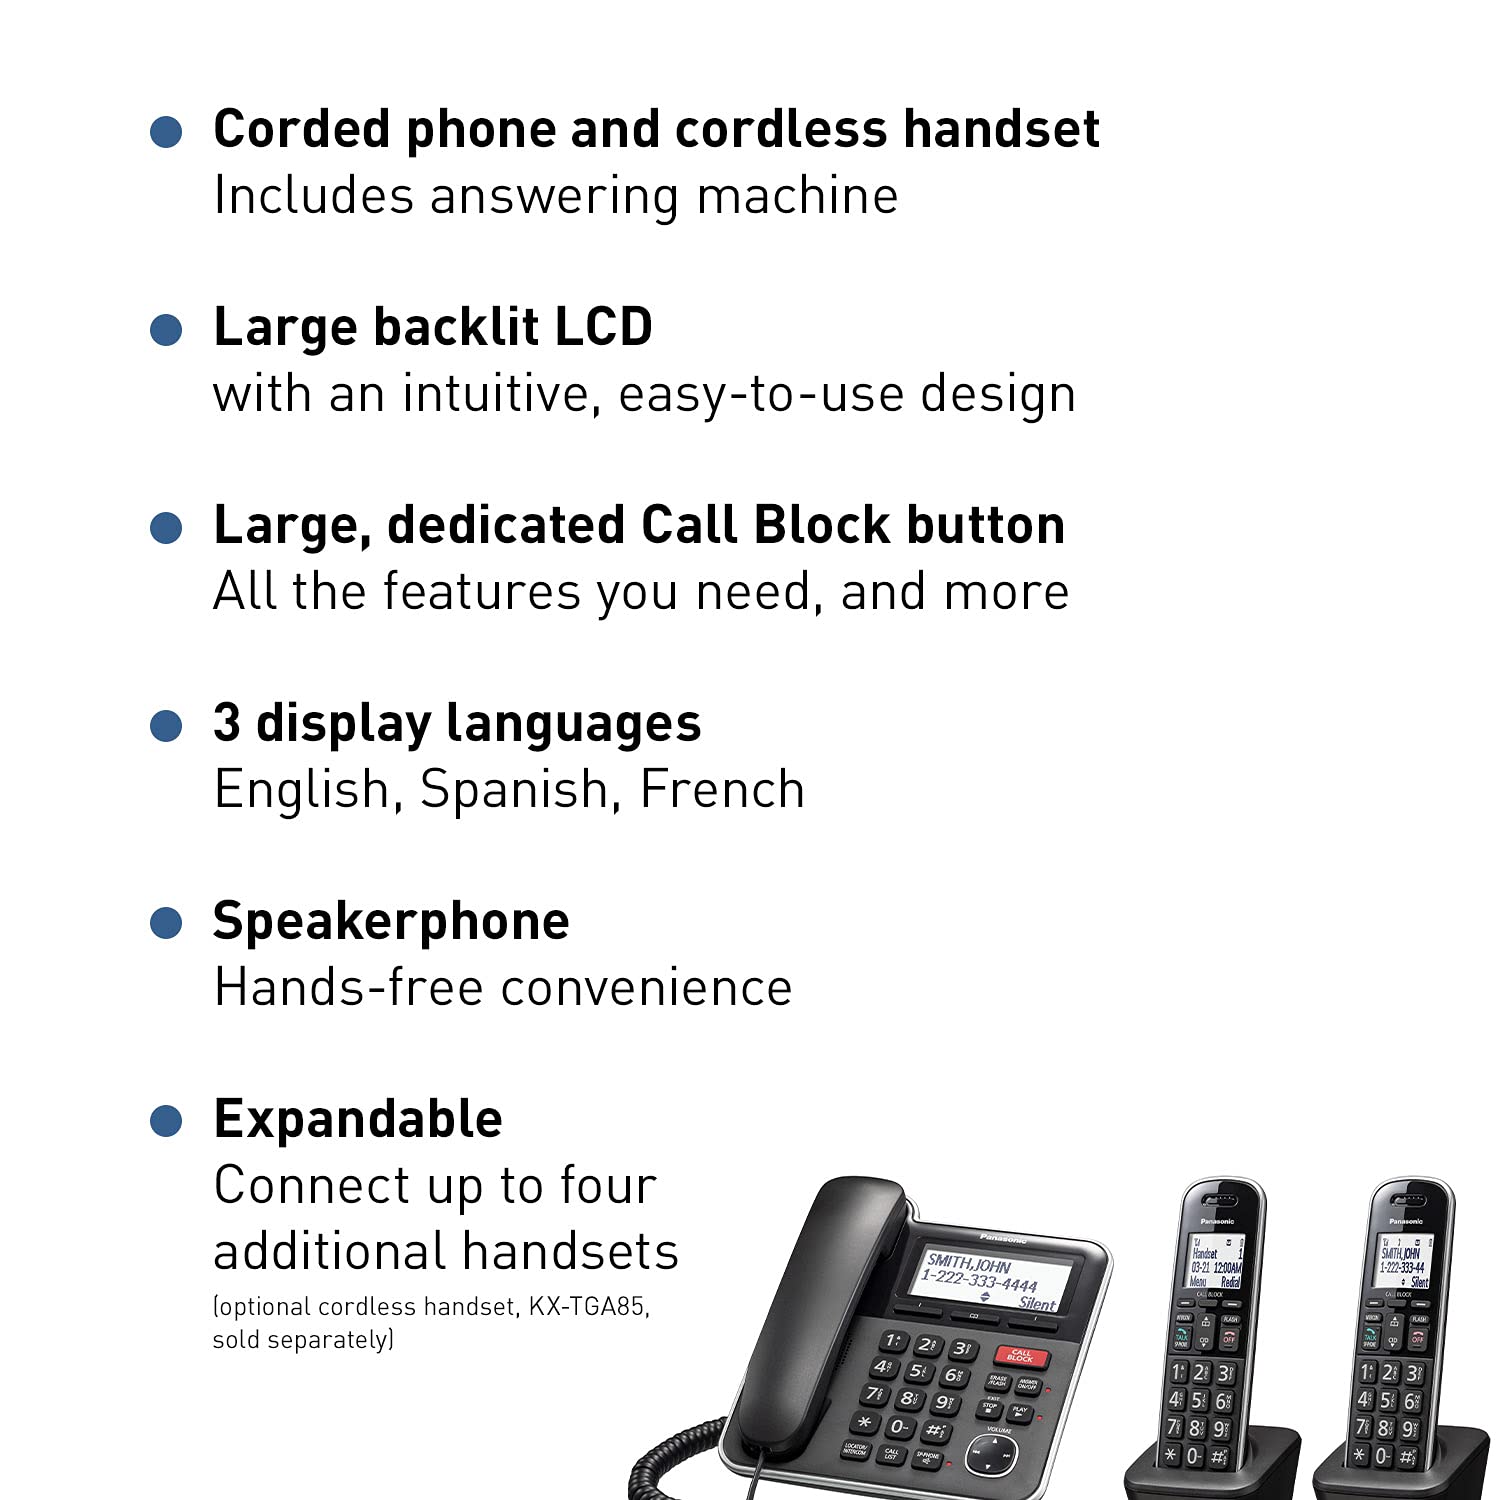 Panasonic Expandable Corded/Cordless Phone System with Answering Machine and One Touch Call Blocking – 2 Handsets - KX-TGB852B (Black)